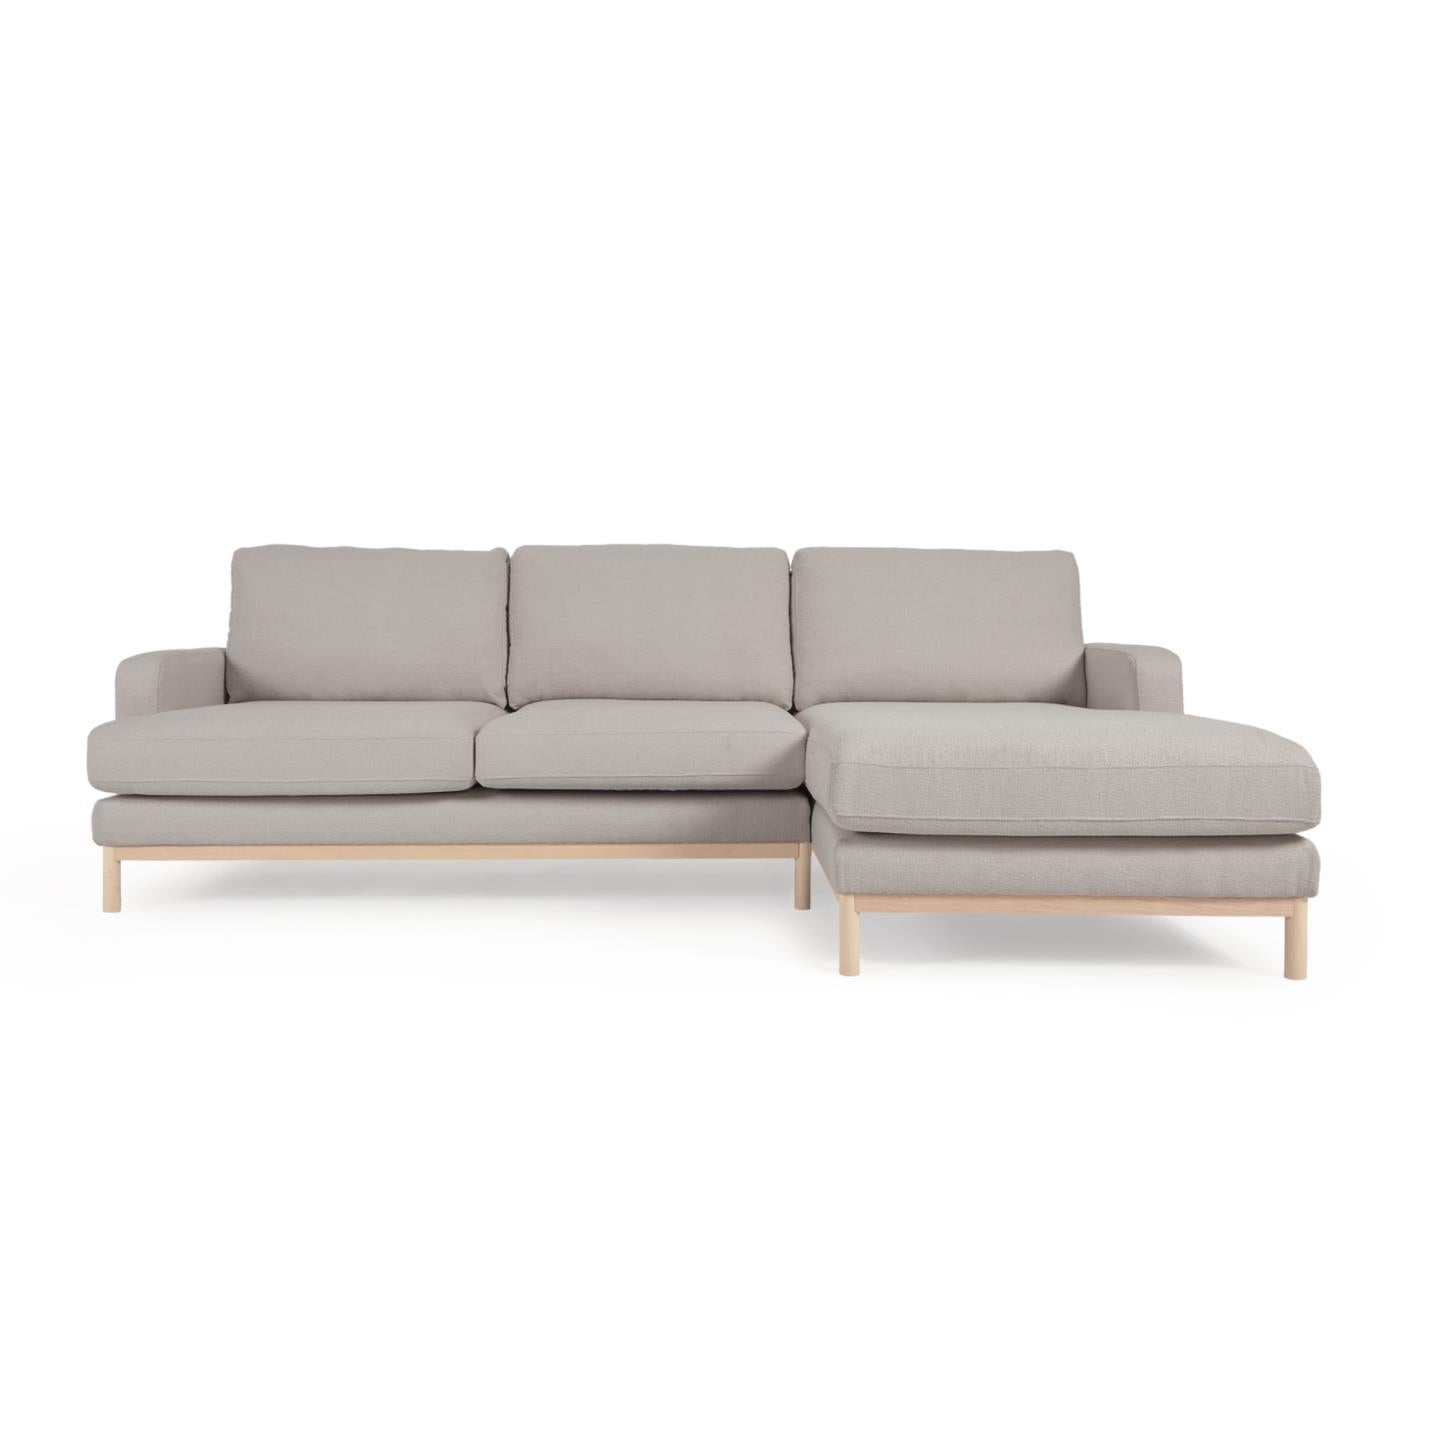 Mihaela 3 seater sofa with right-hand chaise longue in grey fleece, 264 cm